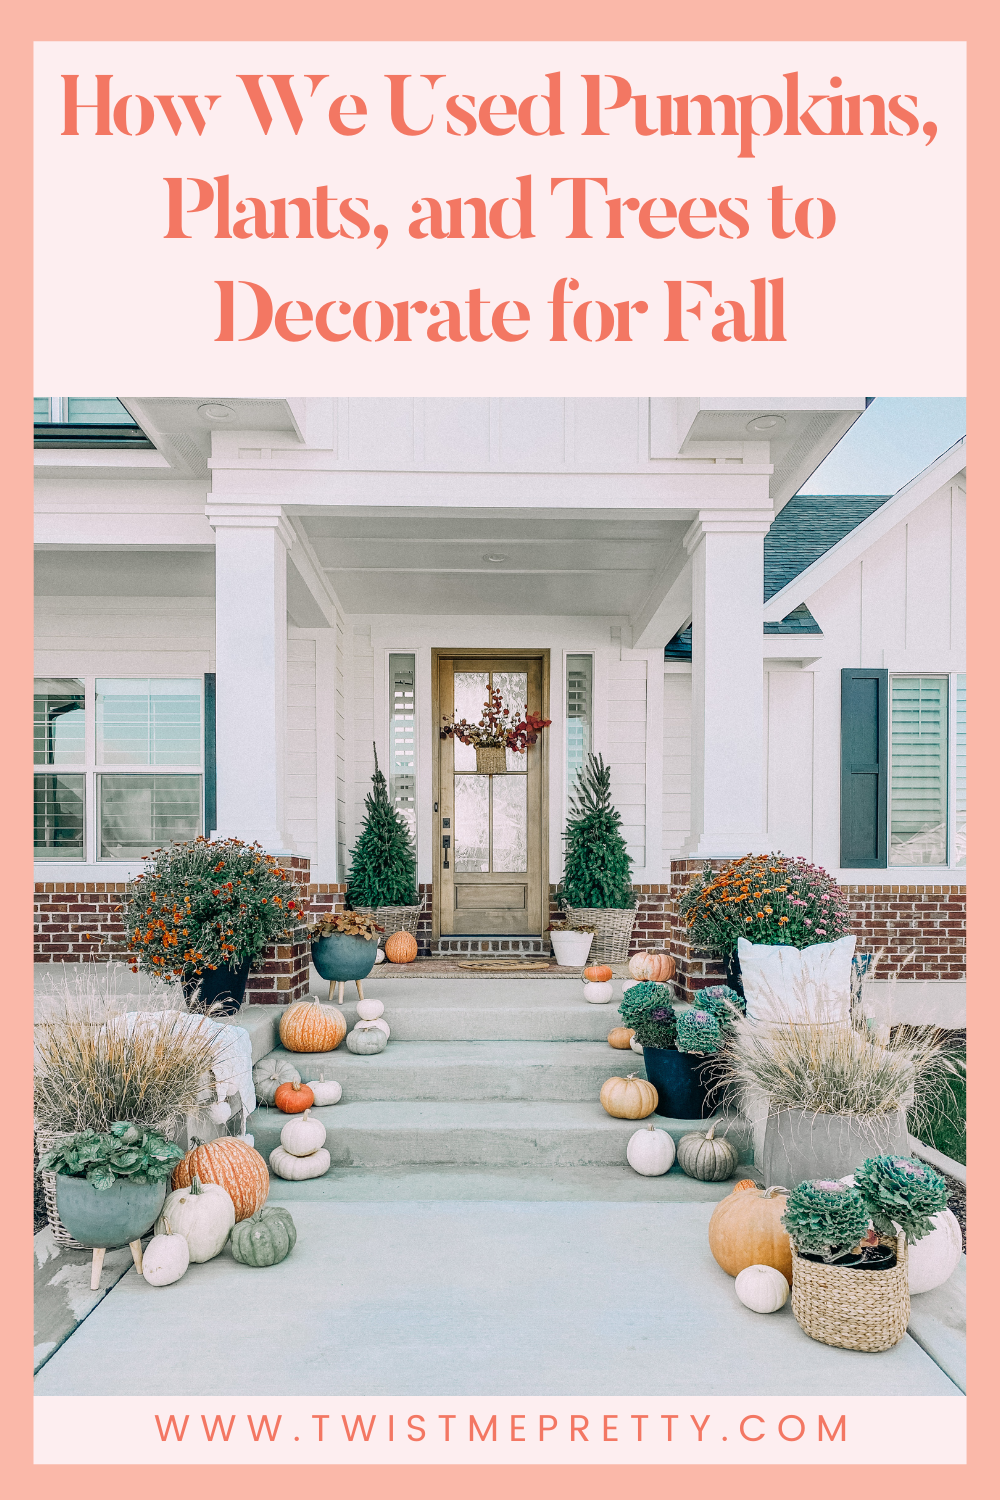 How we used pumpkins, plants, and trees to decorate for fall. www.twistmepretty.com